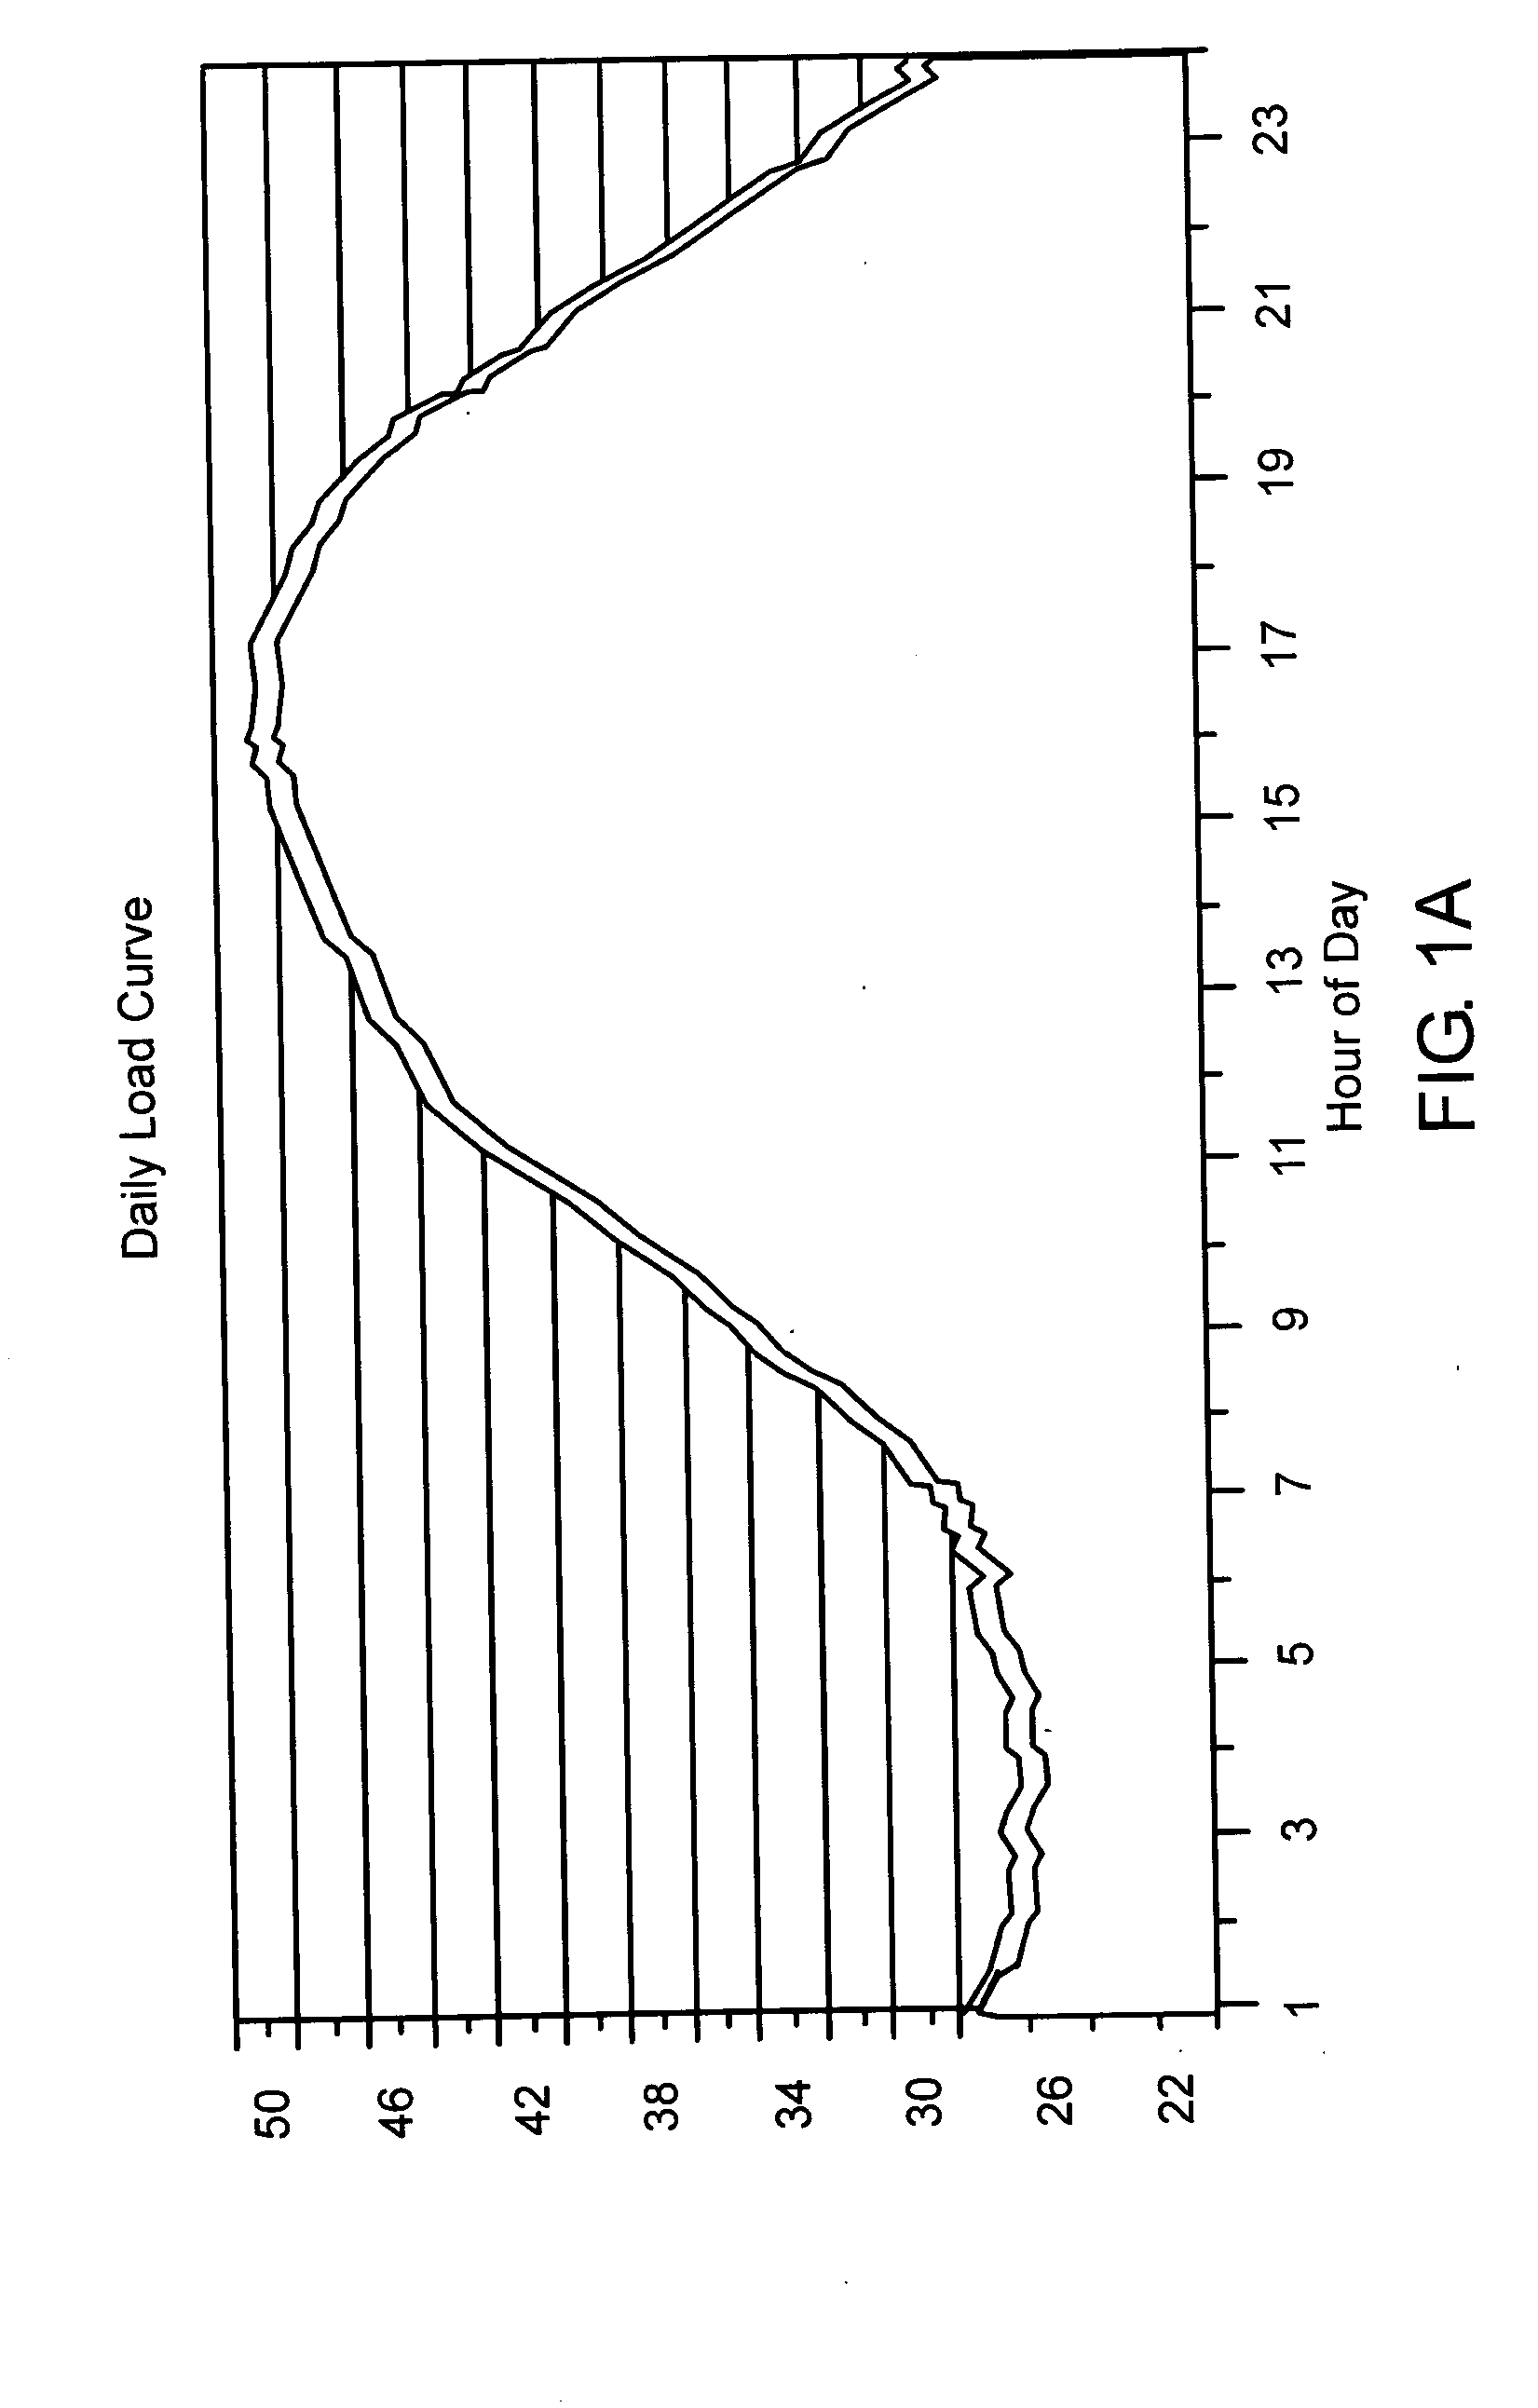 Methods, systems and apparatus for regulating frequency of generated power using flywheel energy storage systems with varying load and/or power generation